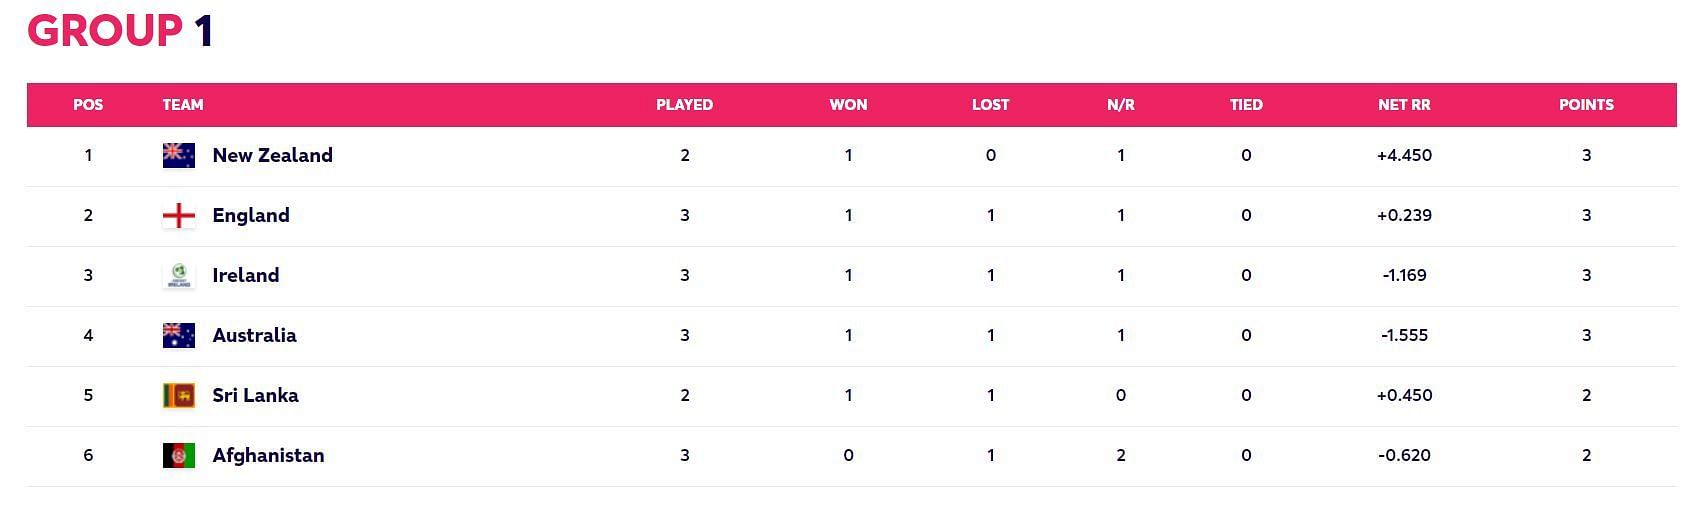 Updated Points Table after Match 26 (Image Courtesy: www.t20worldcup.com)